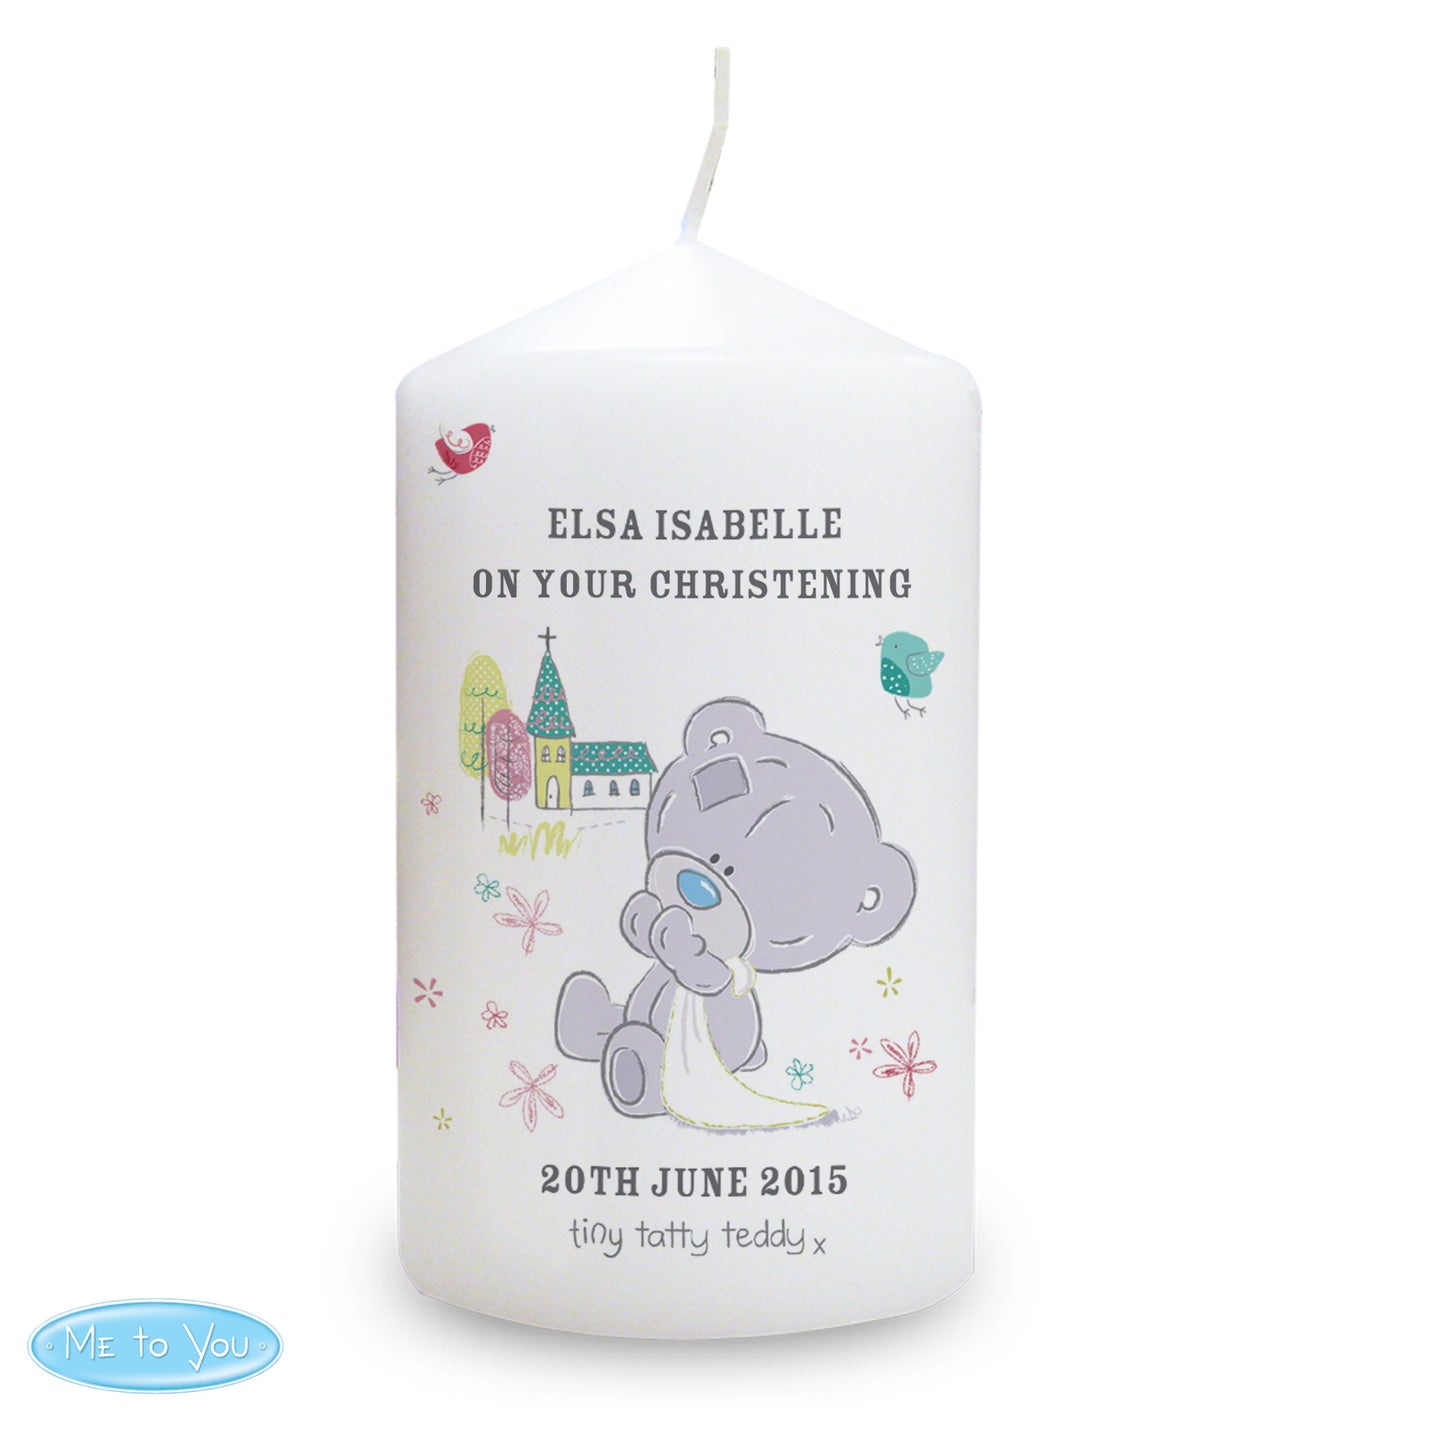 Personalised Tiny Tatty Teddy Christening Candle - Personalise It!